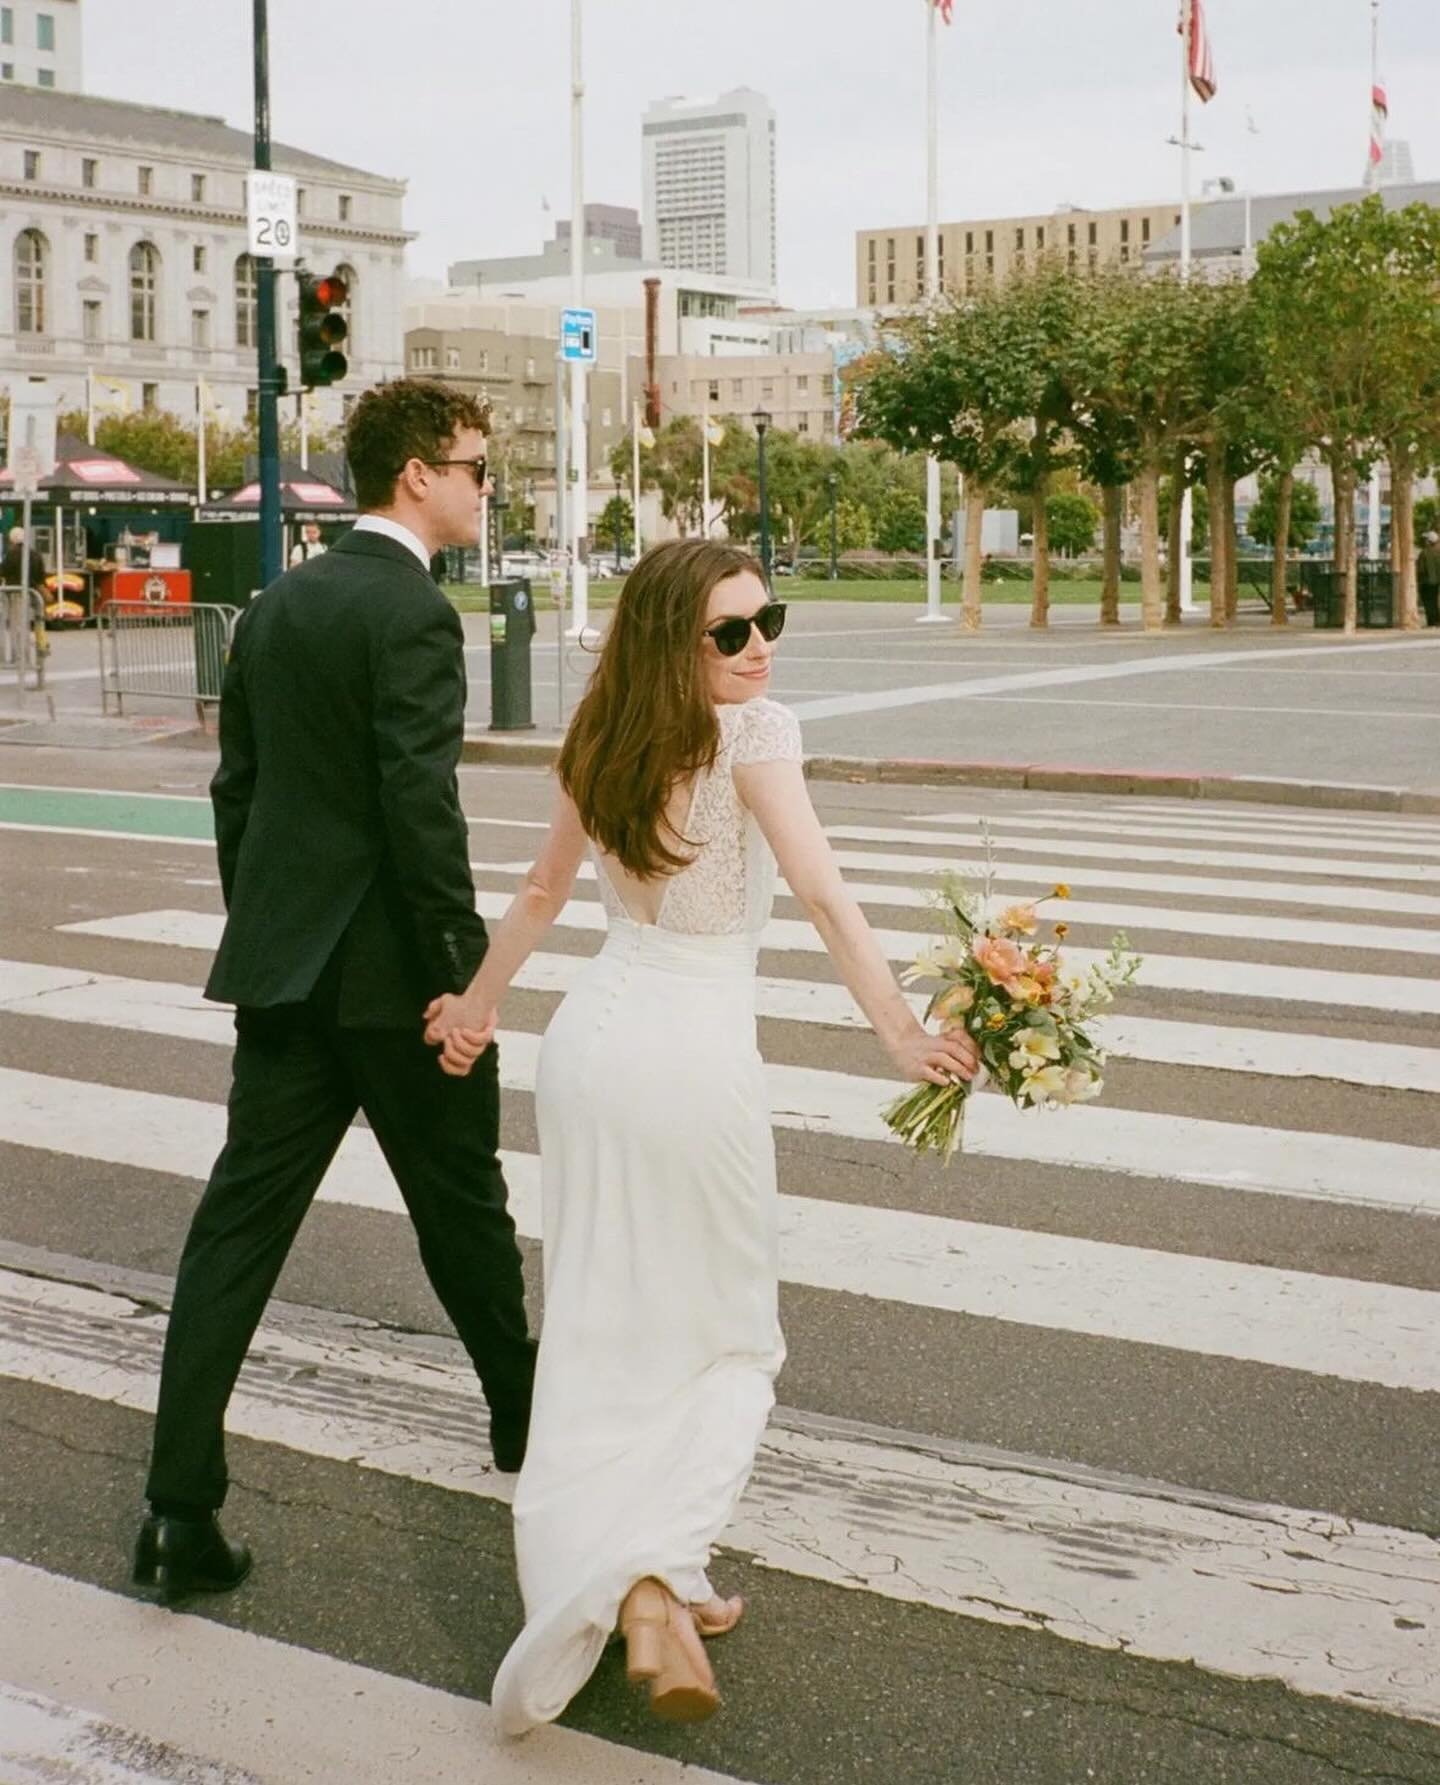 #FINDYOURWILD // W + T ♡
⠀⠀⠀⠀⠀⠀⠀⠀⠀
Our #RealBride Wesley graced the halls of San Francisco&rsquo;s iconic #SFCityHall, looking stunning in the exquisite 𝑩𝒖𝒌𝒐𝒘𝒔𝒌𝒊 gown by @lauredesagazan as she exchanged vows with her love Tyler. Heartfelt con